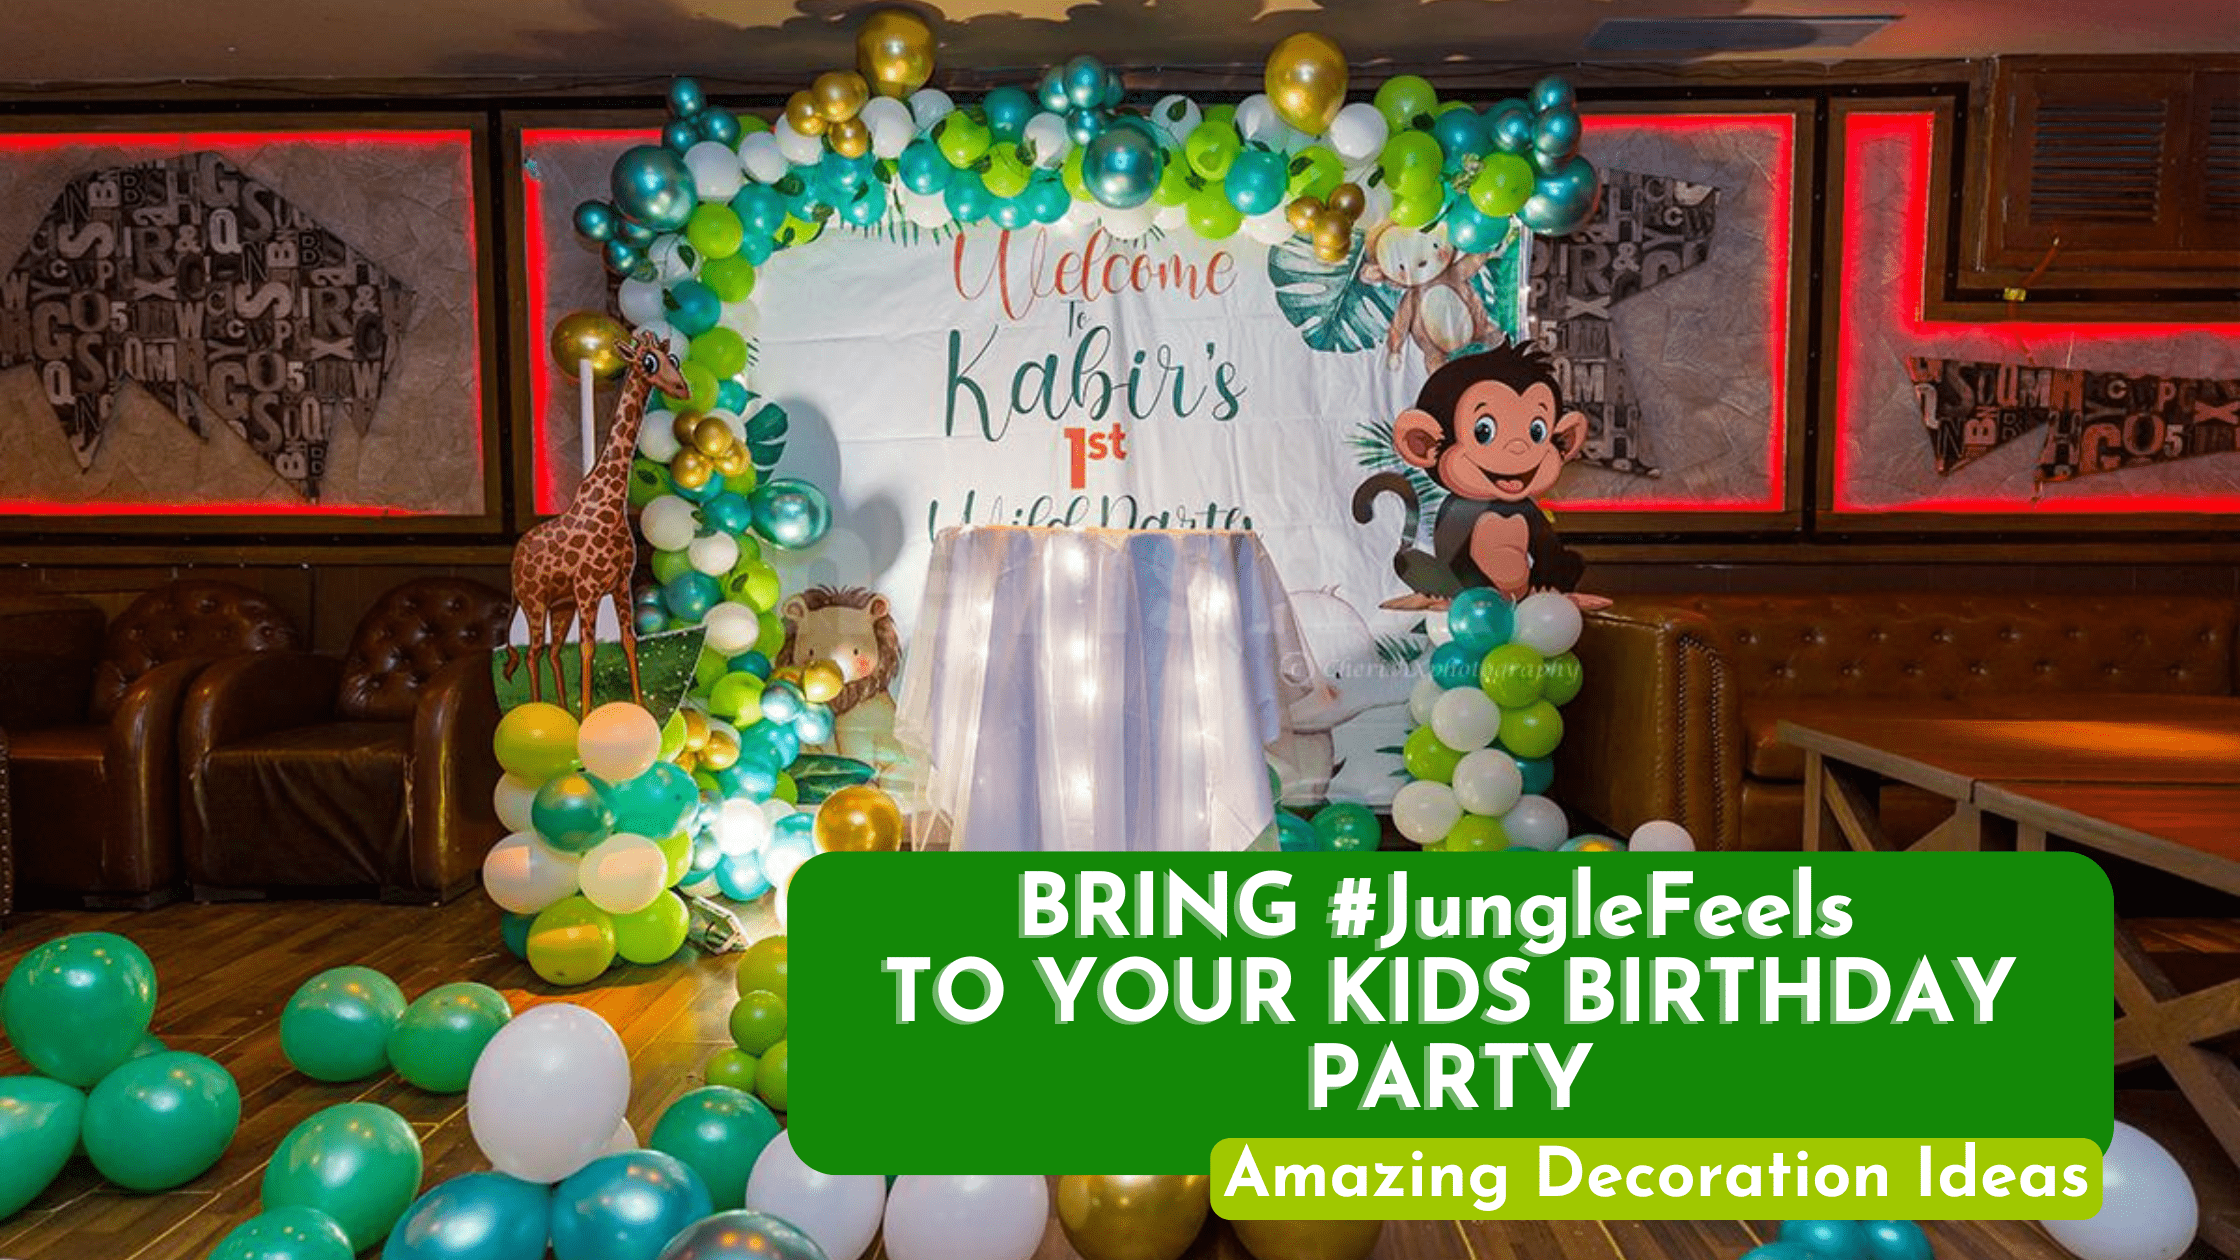 Bring Jungle Feels to your Kids Birthday Party with these MUST-HAVE Decoration Ideas